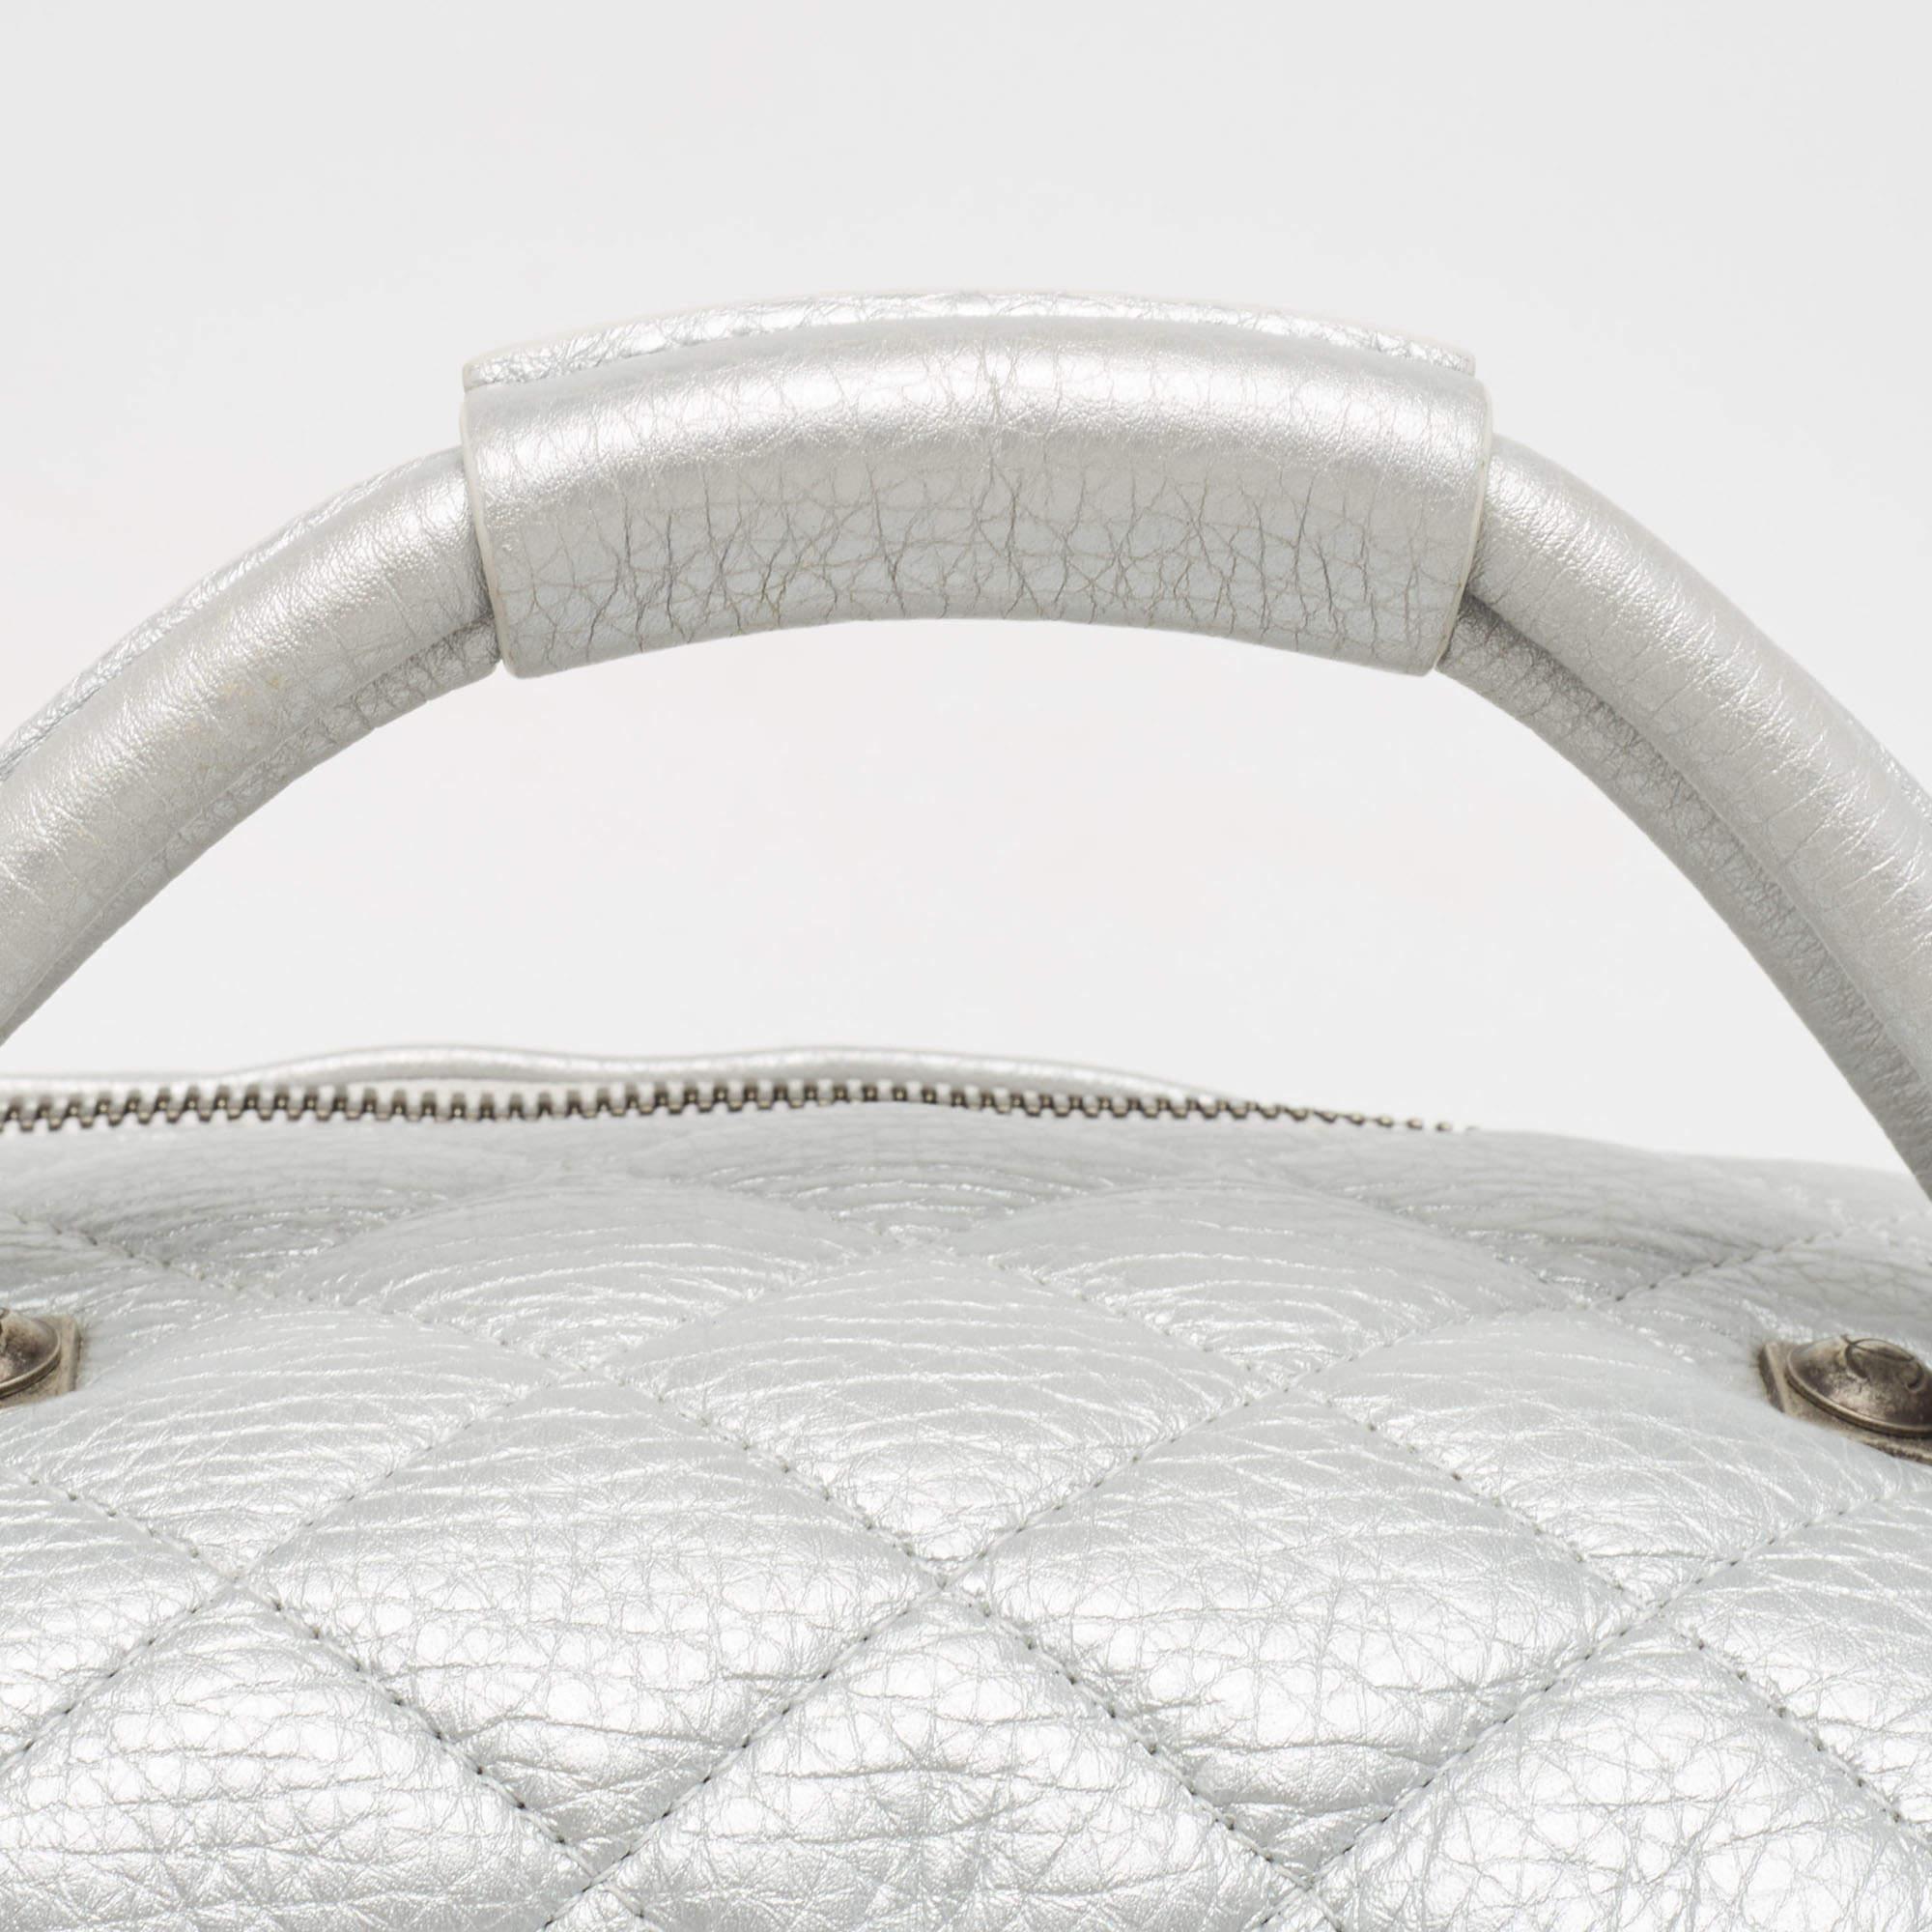 Chanel Metallic Grey Quilted Leather Airlines Round Trip Bowler Bag In Good Condition For Sale In Dubai, Al Qouz 2